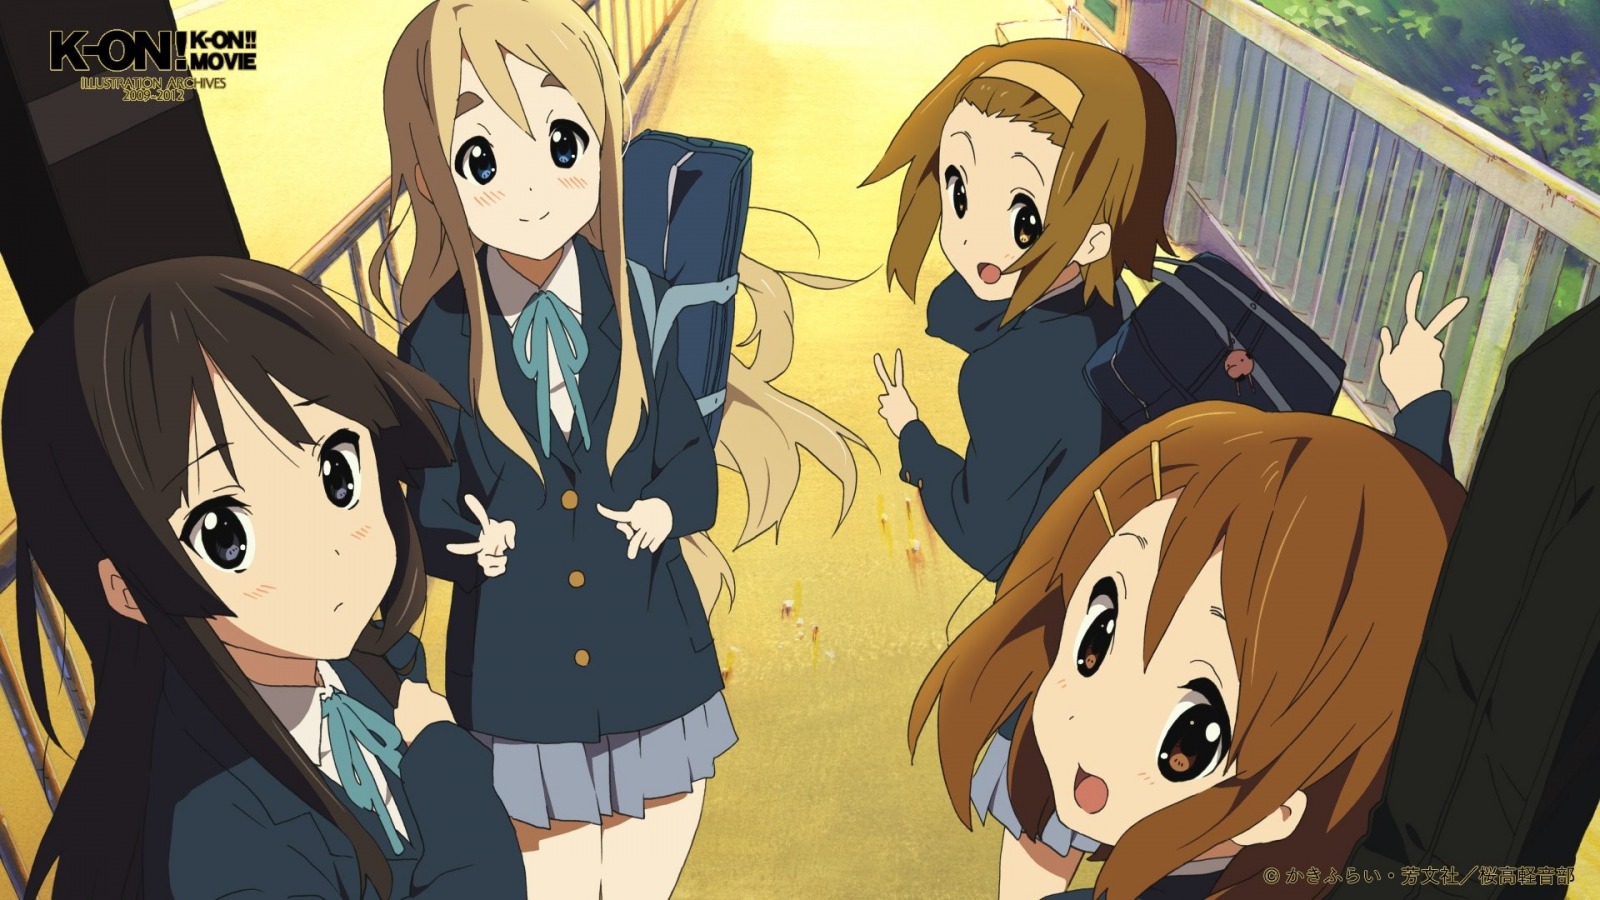 K-ON! IILUSTRATION ARCHIEVES 2009-2012 P.1 [P7]